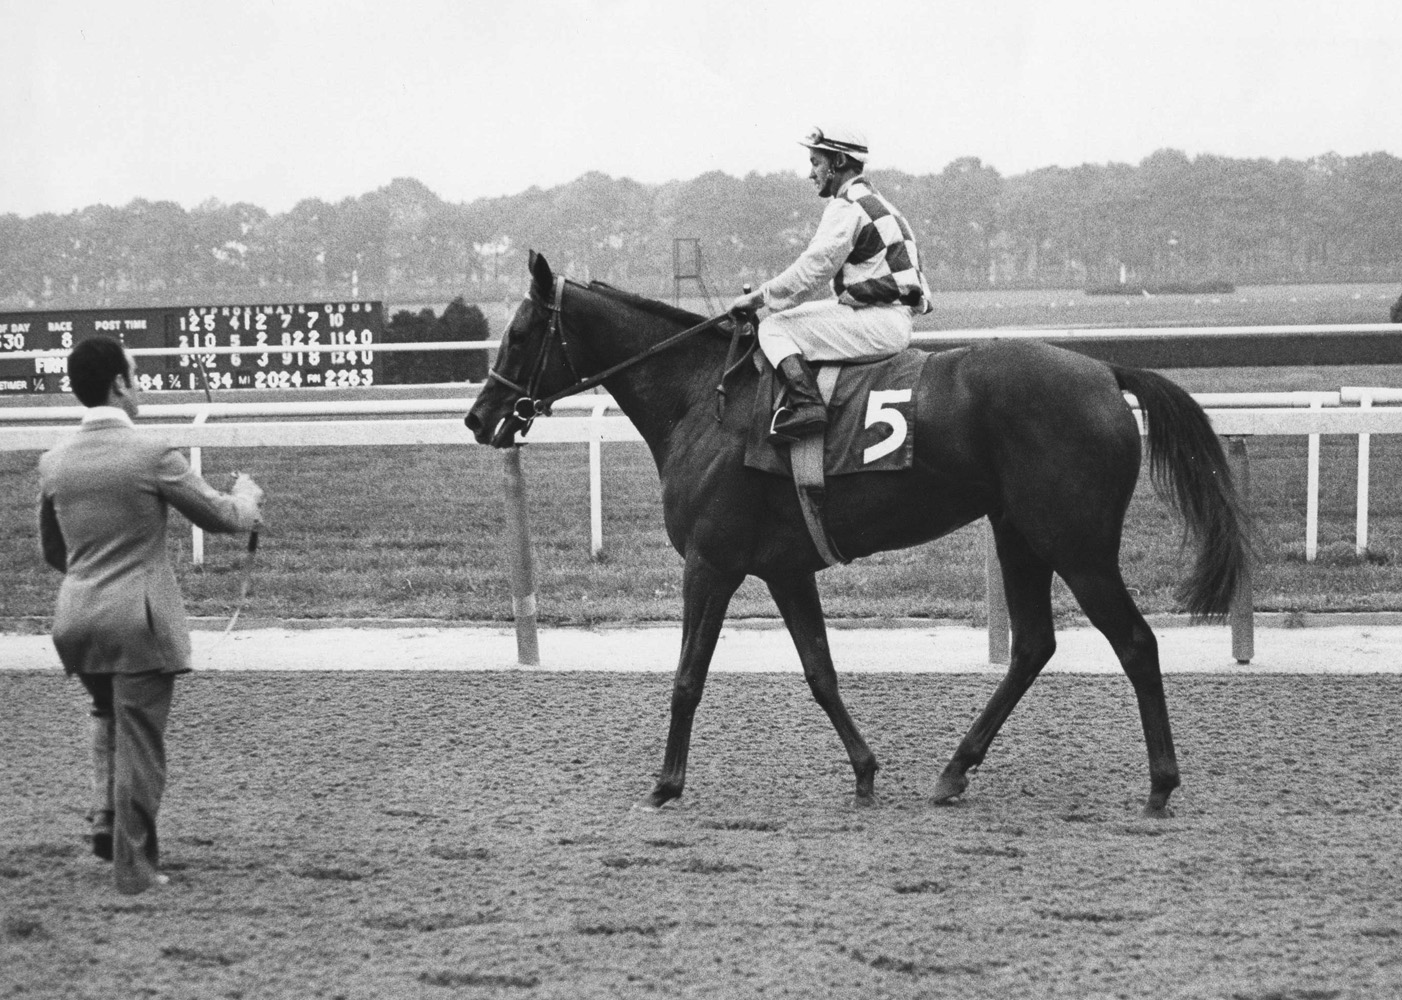 Dahlia (Ron Turcotte up) after winning the 1974 Man o' War Stakes at Belmont Park (Ray Woolfe, Jr./Museum Collection)